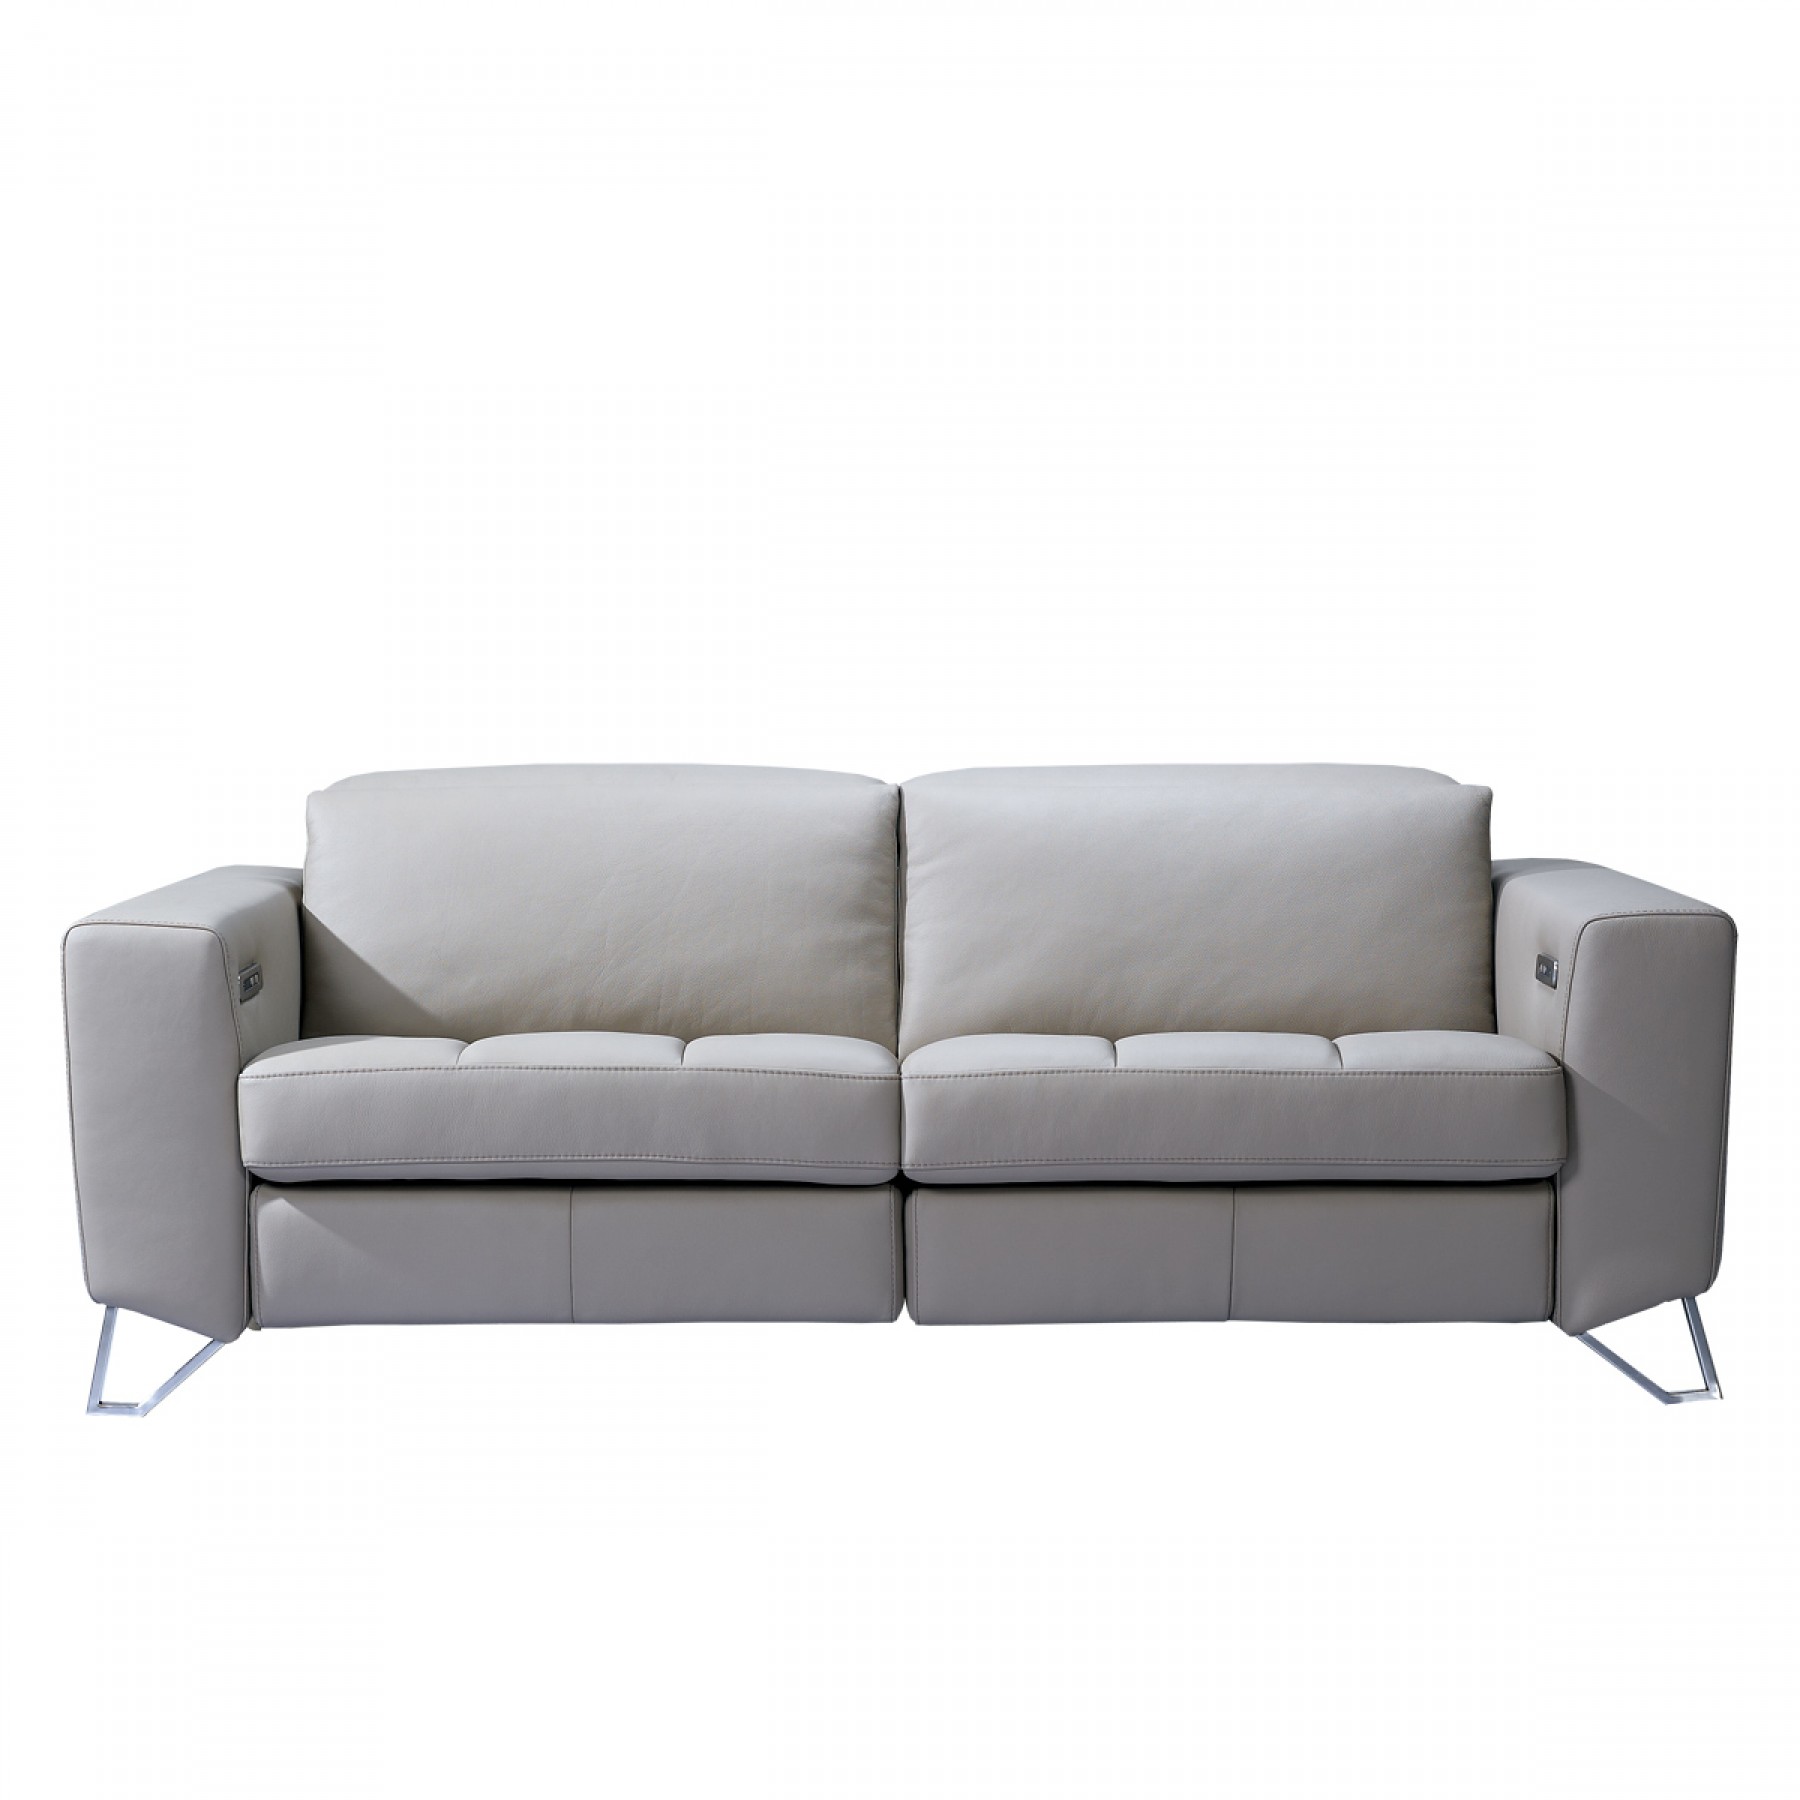 APERTO-3-SEATER-RECLINER-LEATHER-SOFA